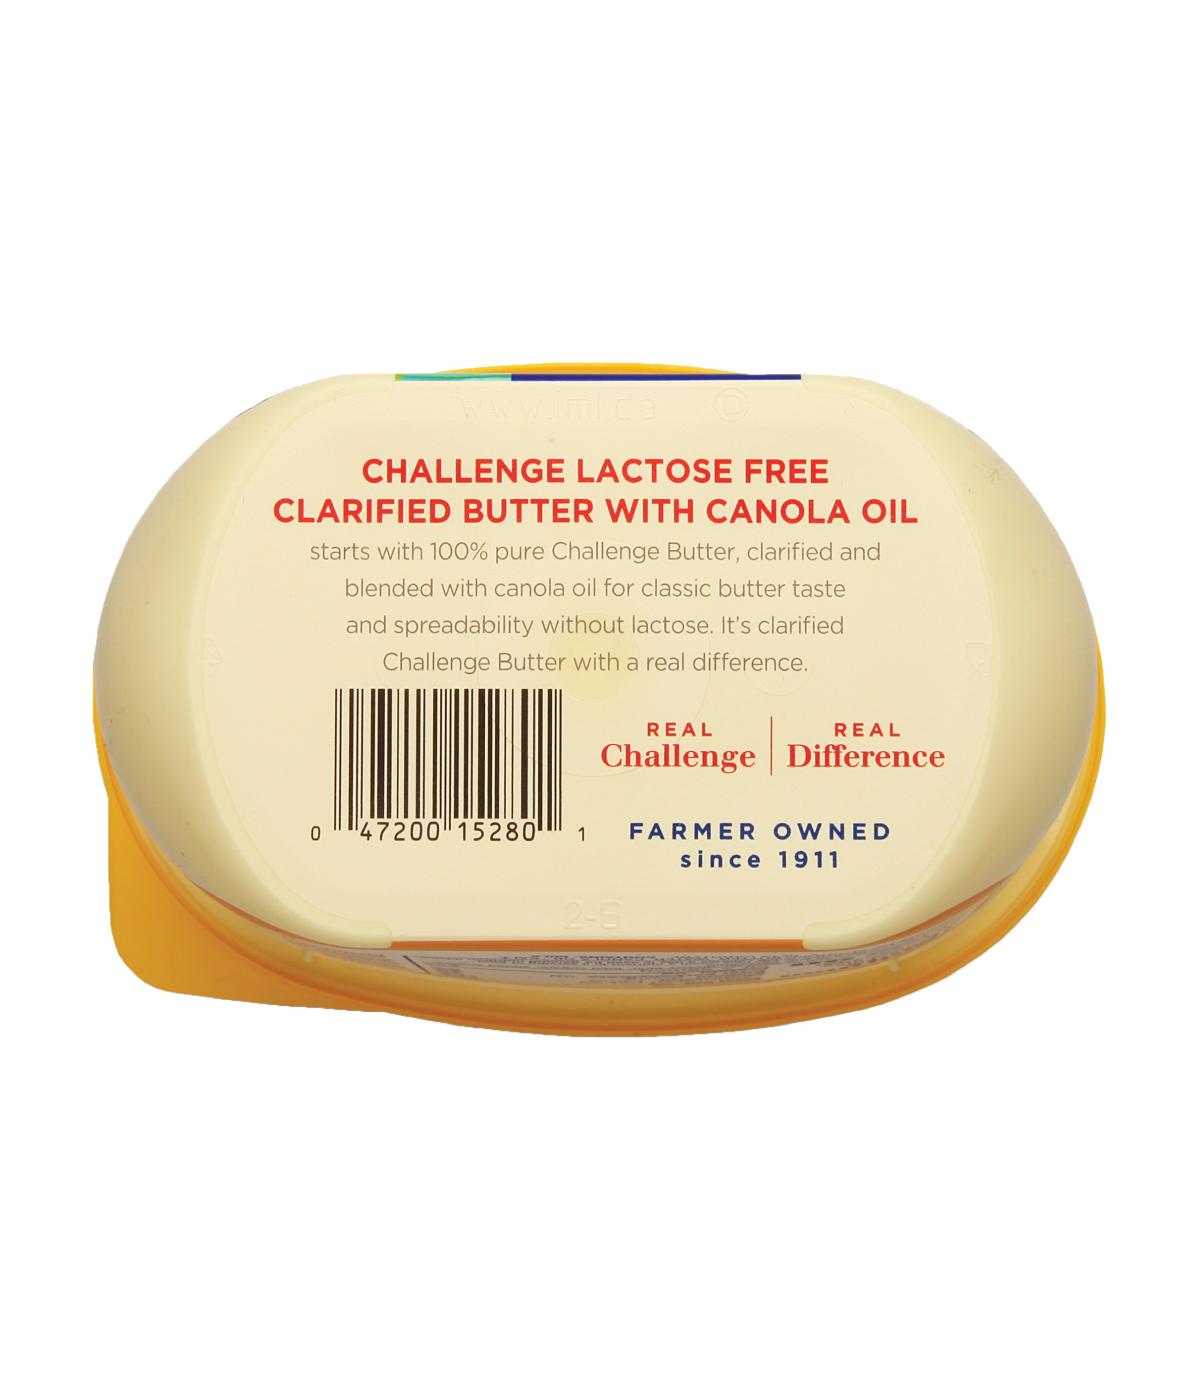 Challenge Butter Lactose Free with Canola Oil; image 2 of 4